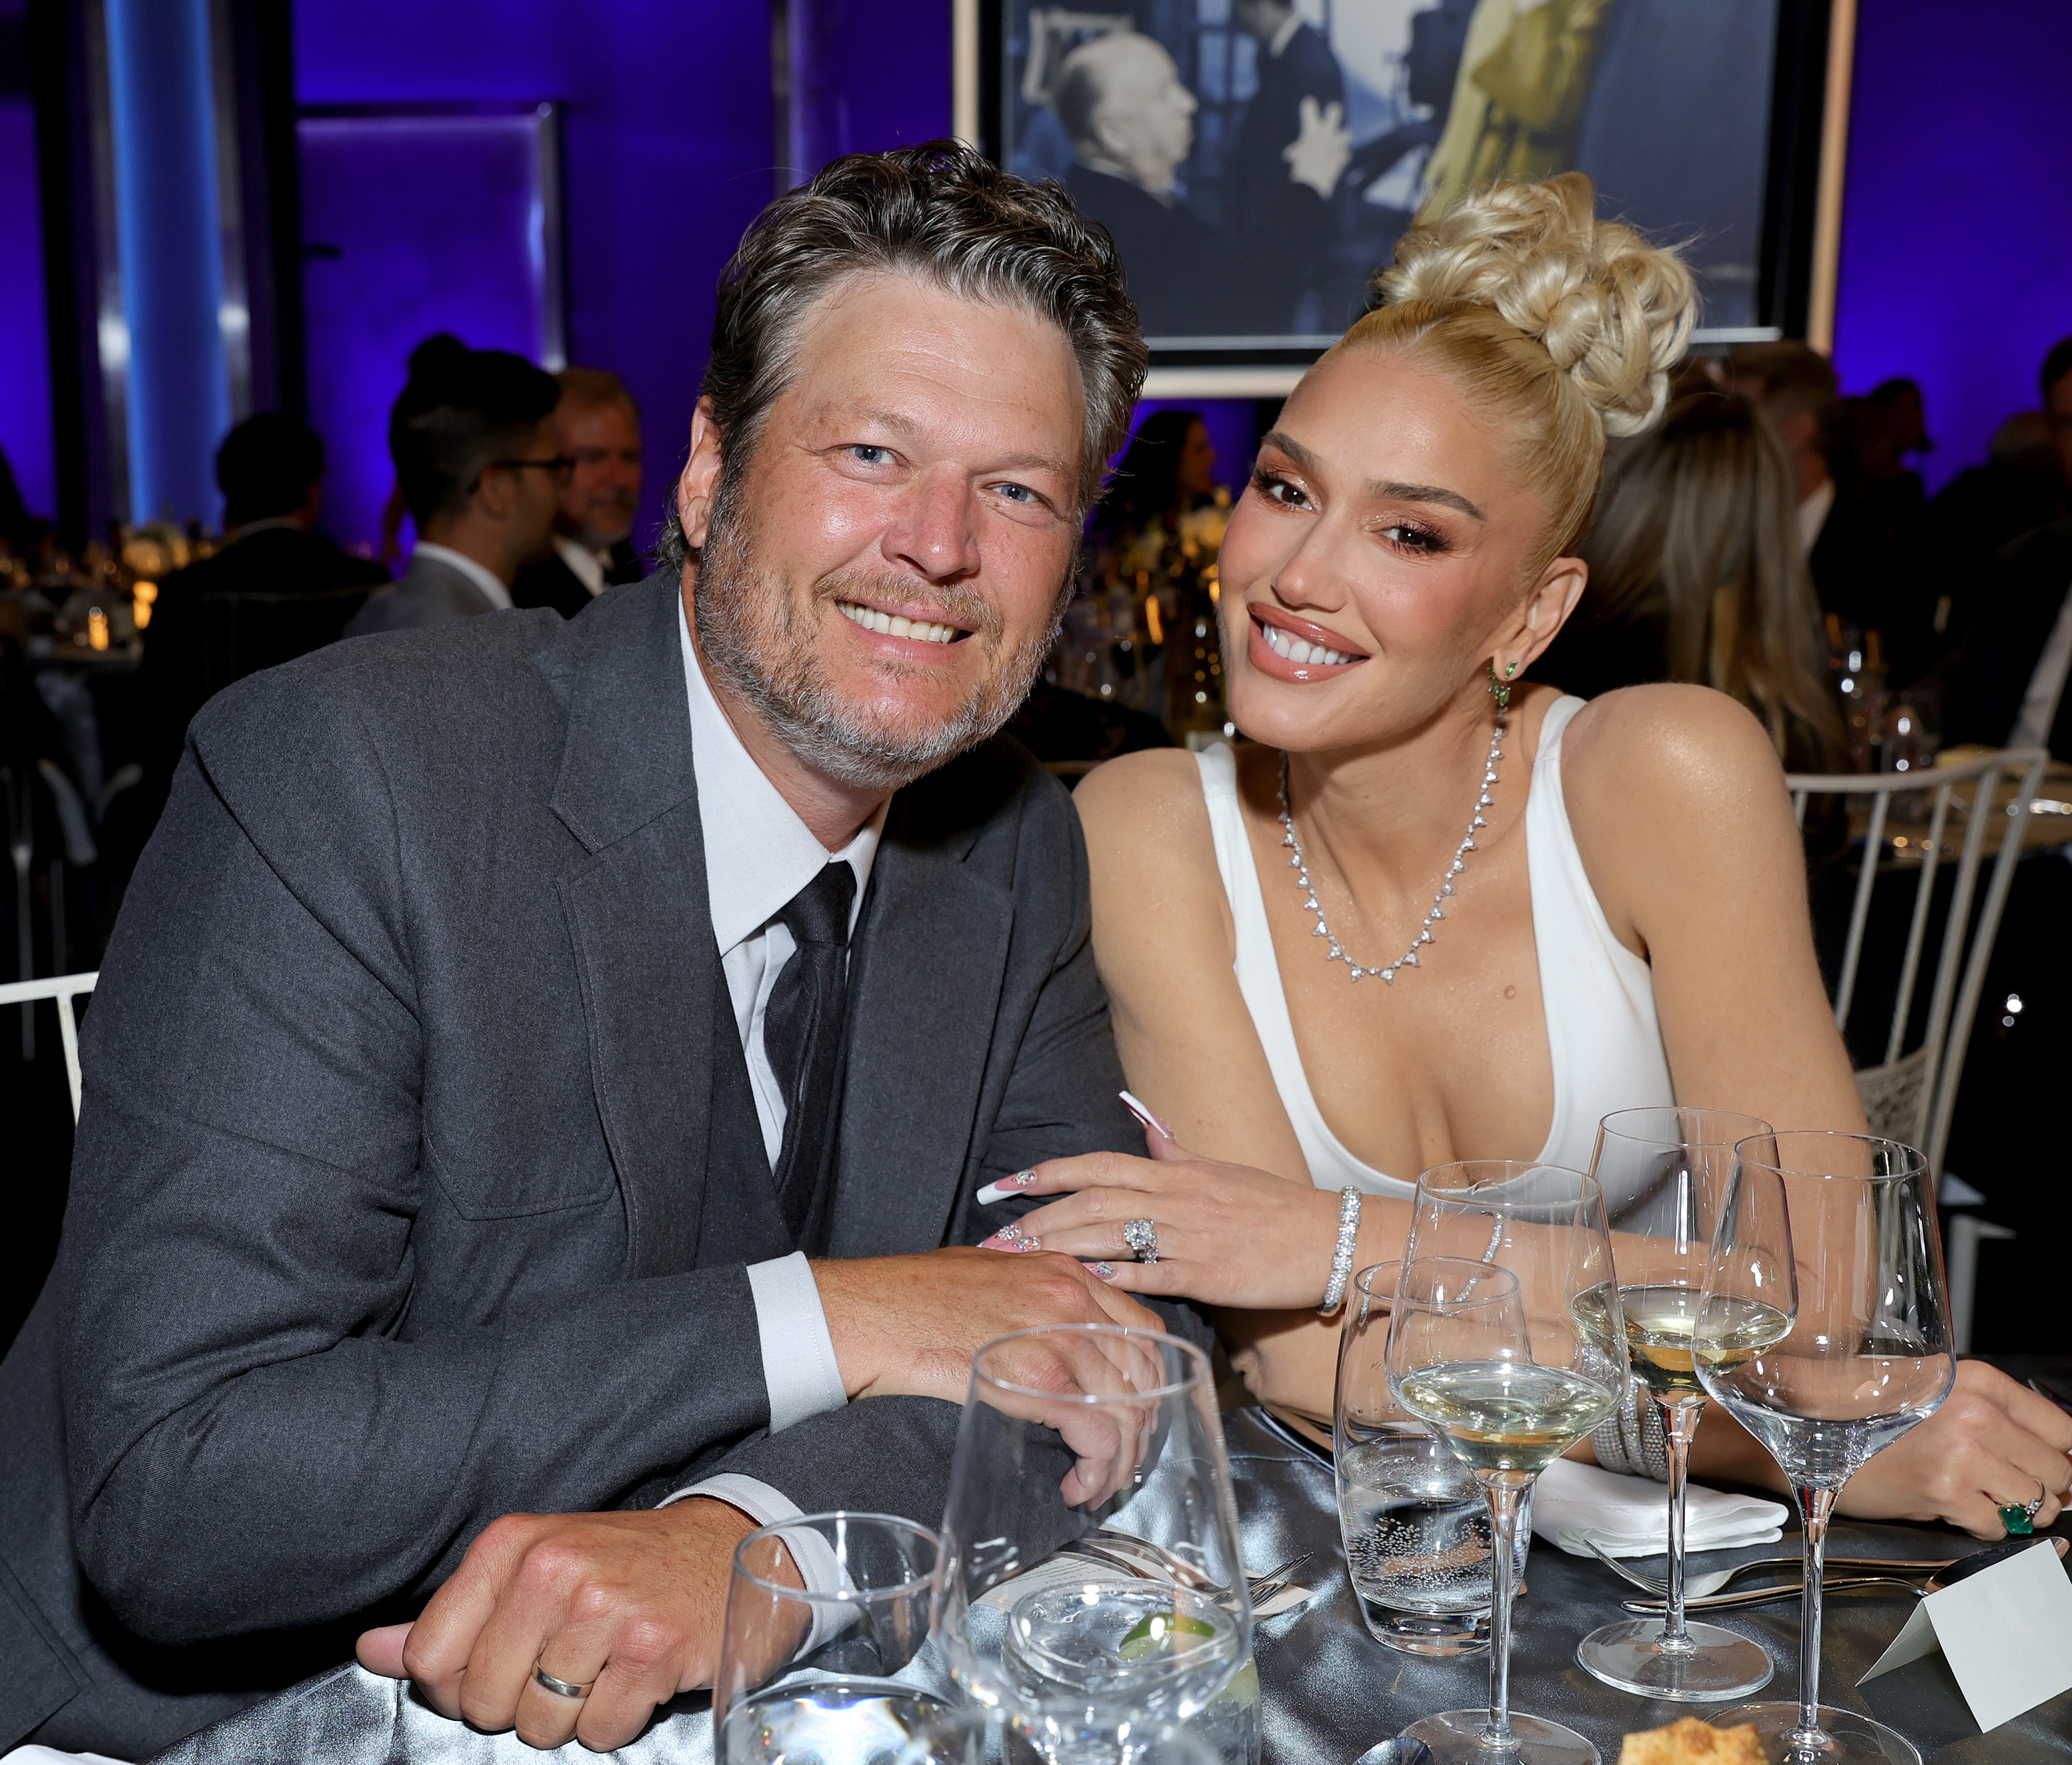 Rumors have been circulating that Gwen and Blake are having marriage issues